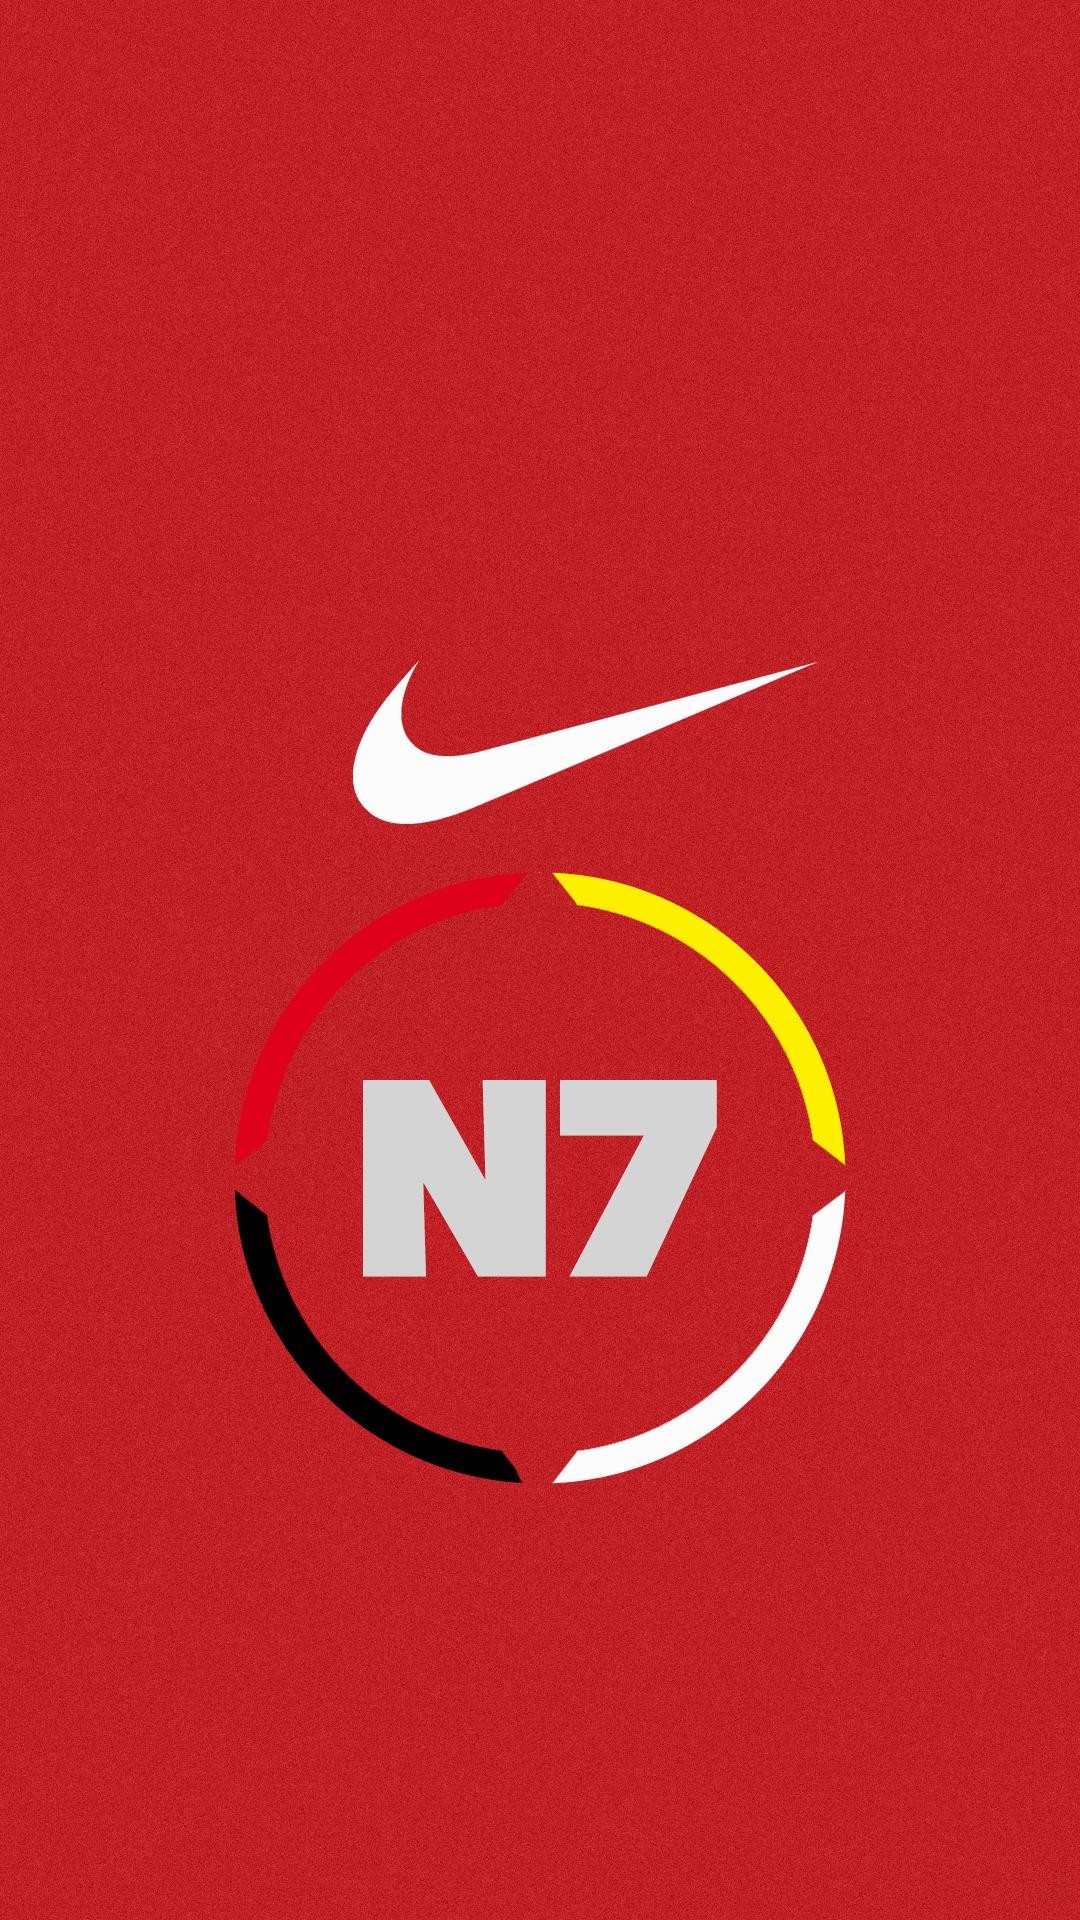 1080x1920 wallpaper.wiki-Download-Free-Nike-Image-for-Iphone-